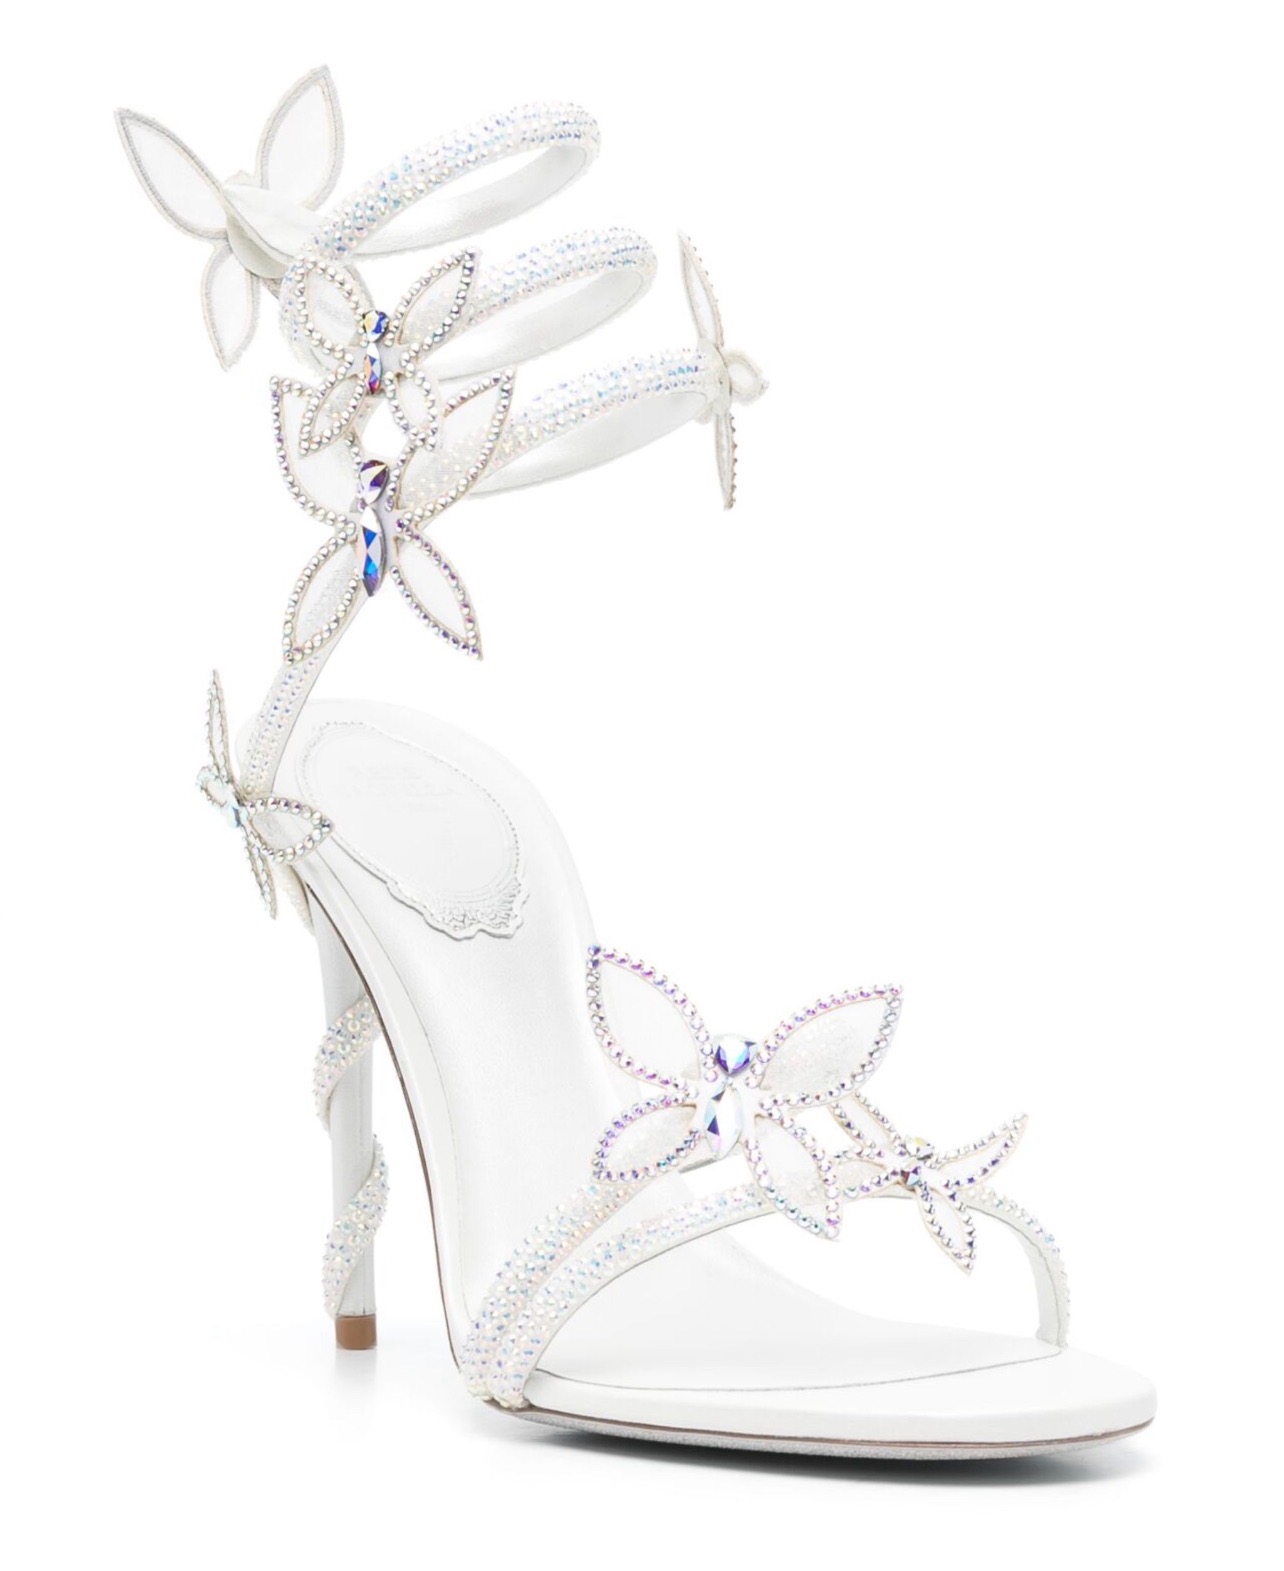 Bomb Accessories of the Day: Splurge on $1206 Rene Caovilla’s Margot Butterfly Sandals